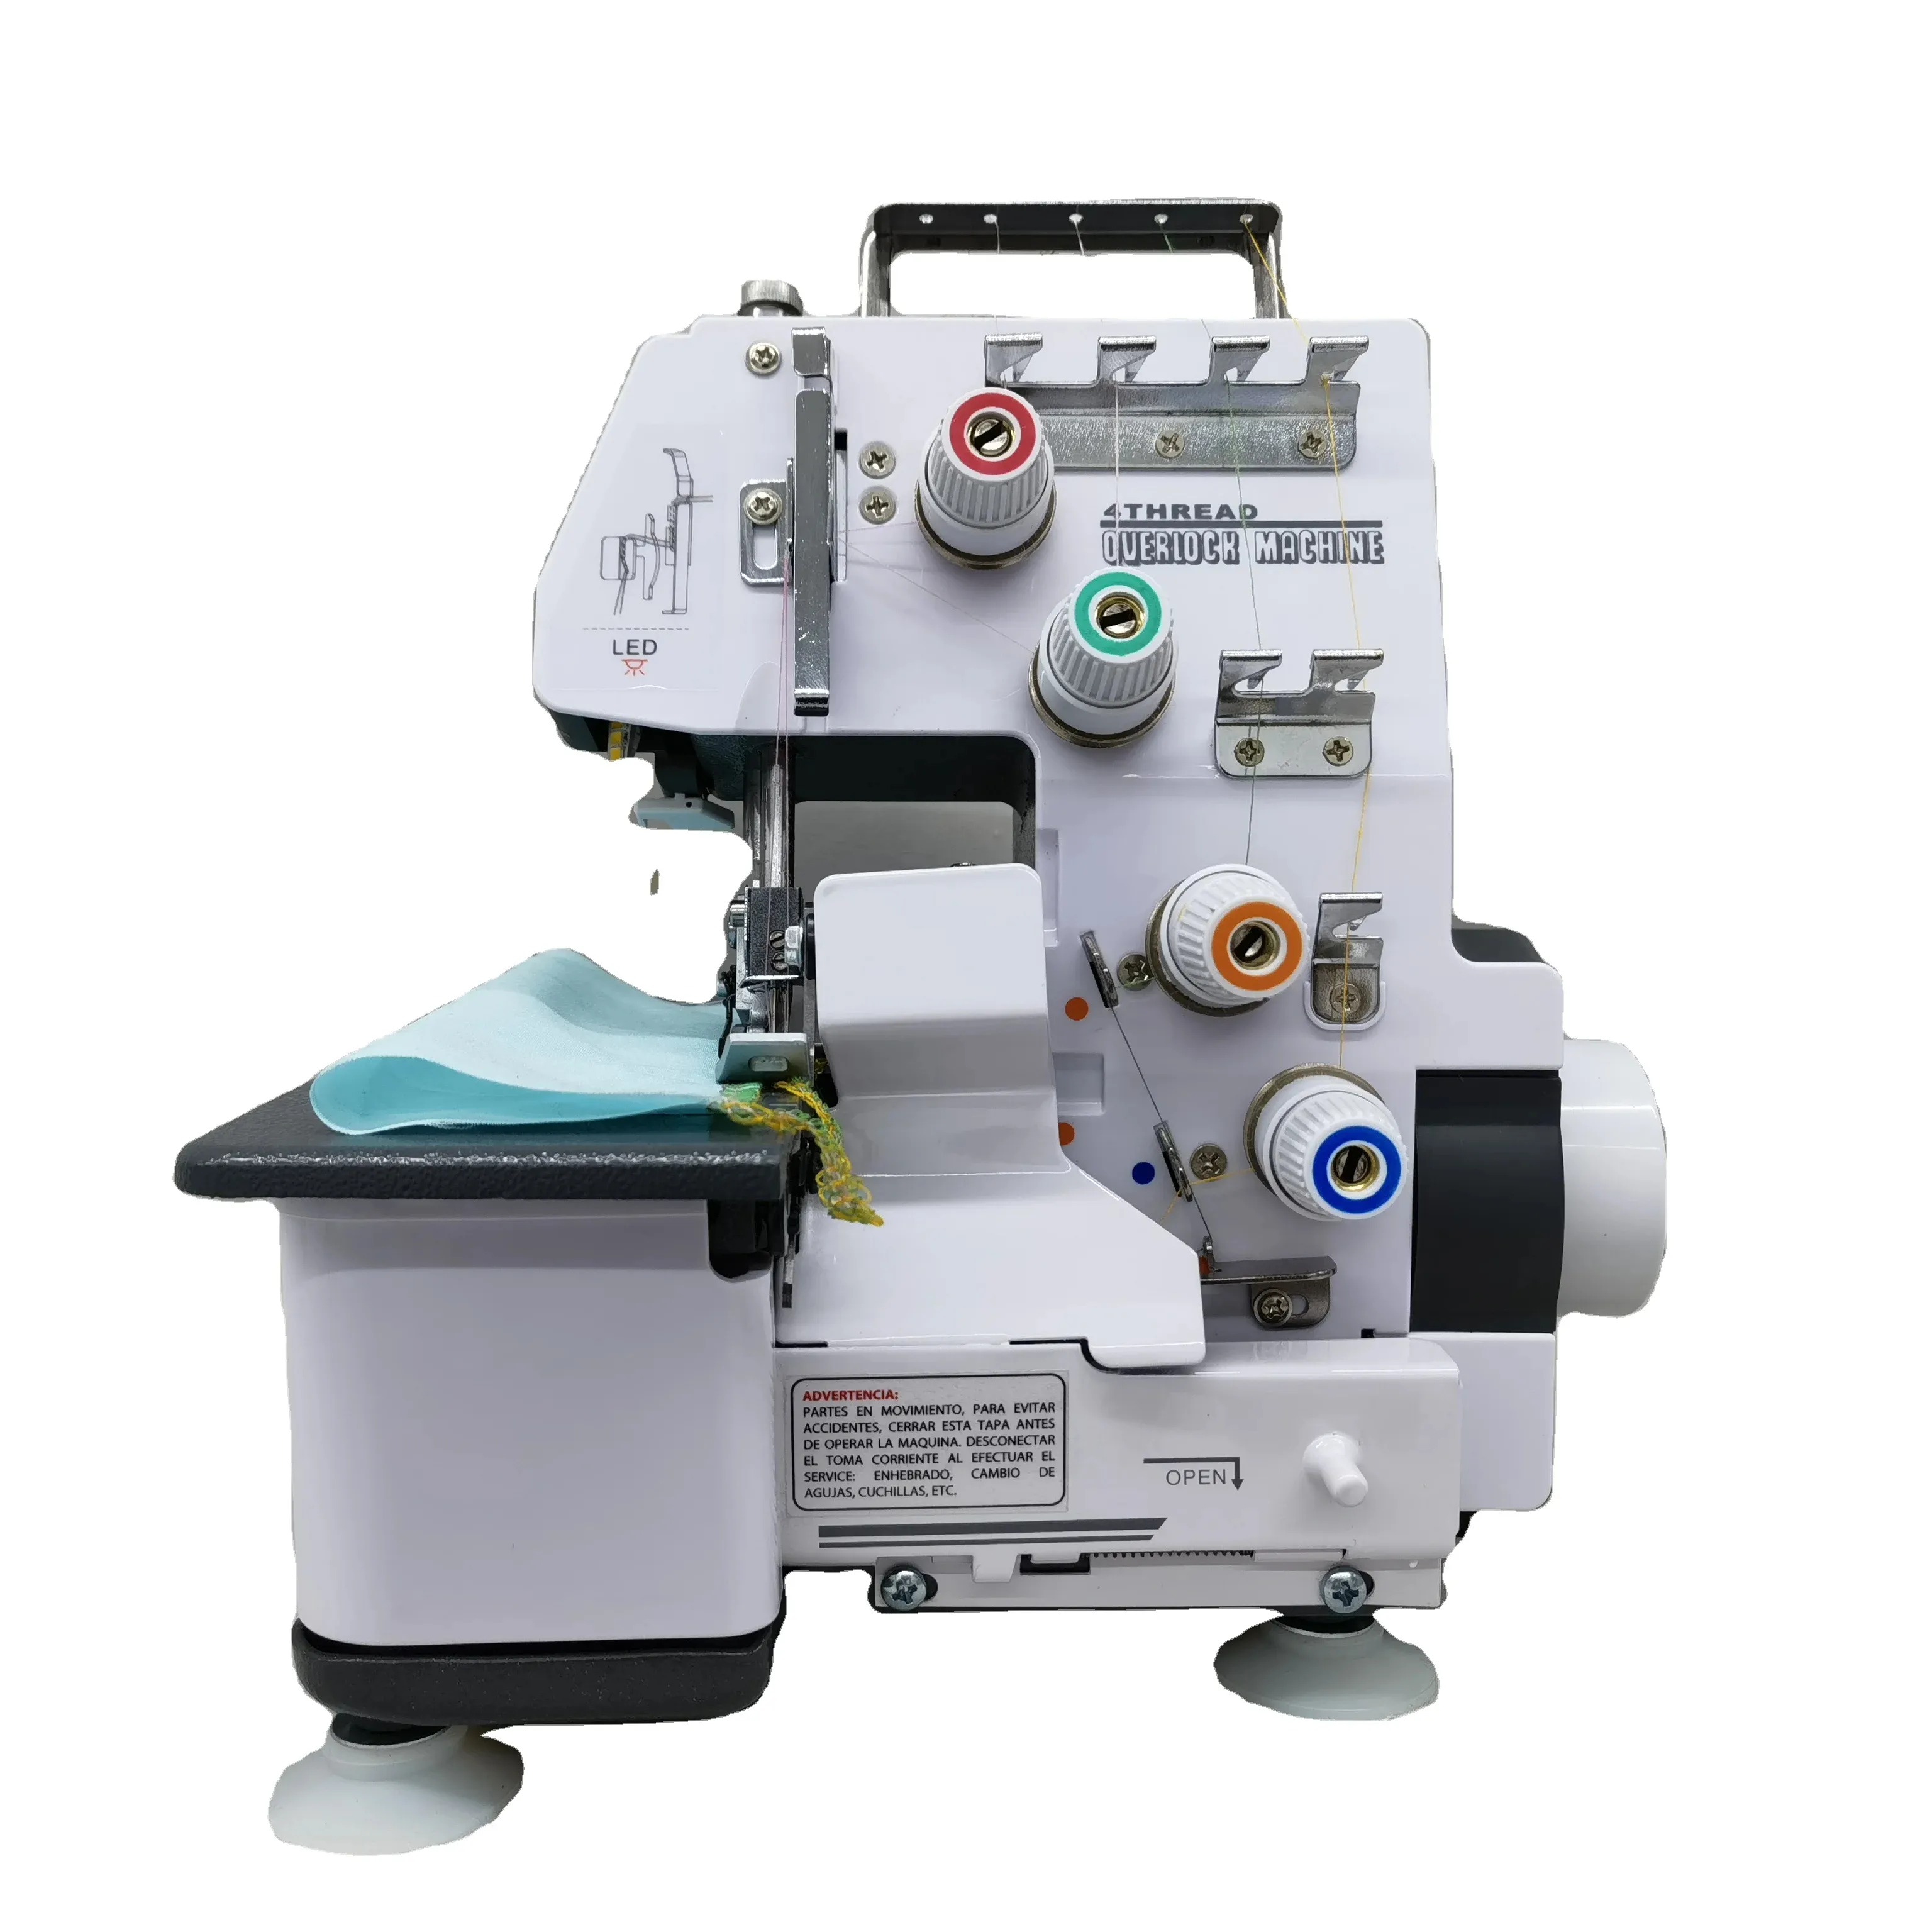 HOT sale JUKKY434 Multi functional mini overlock sewing machine 3 4 thread dress gray household portable good price for home use